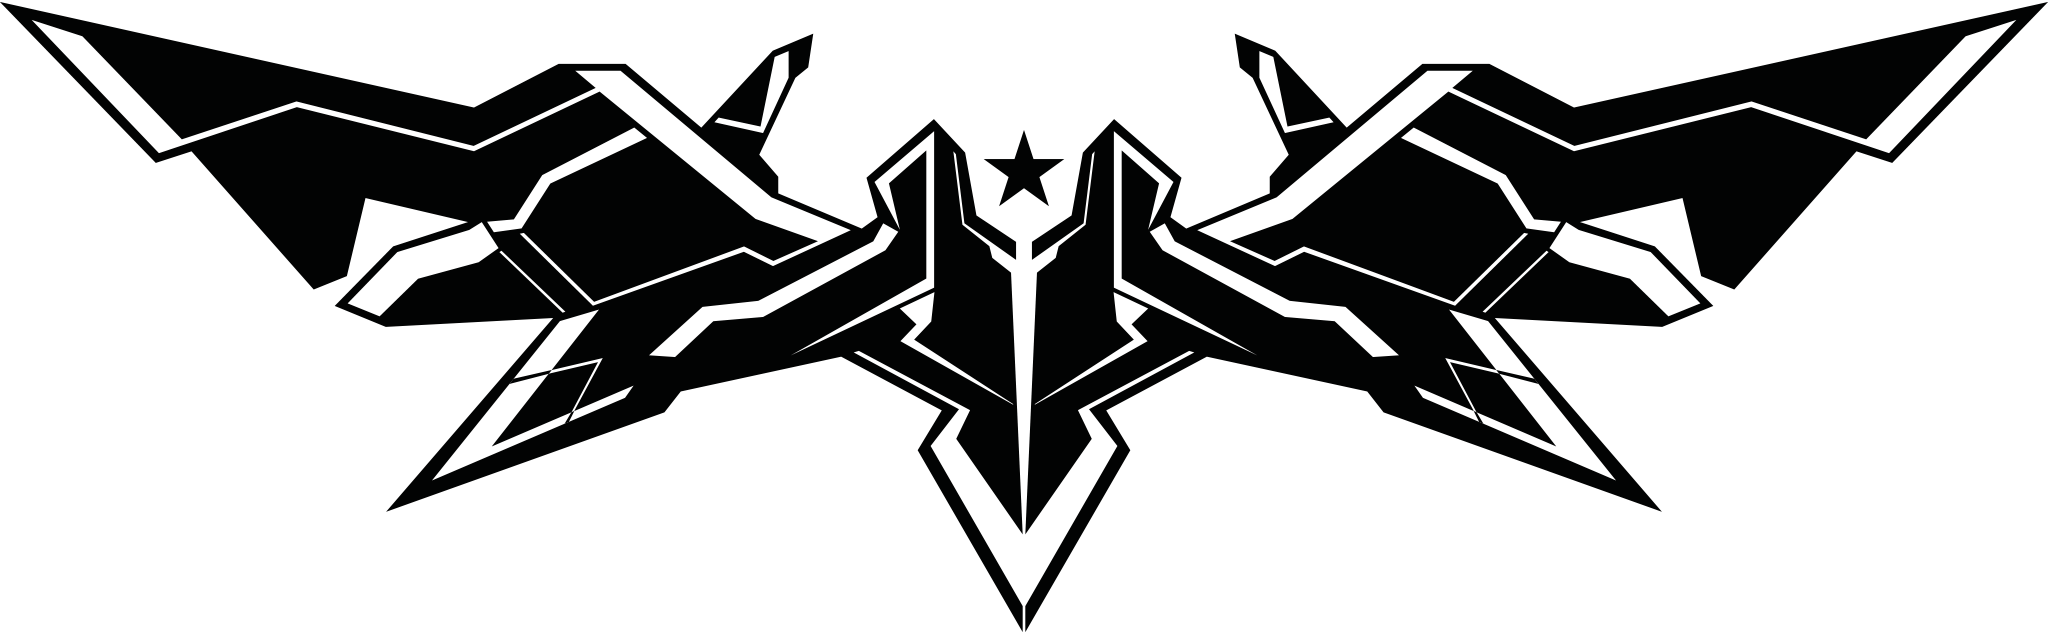 black_rock_shooter___the_game_logo_vector_by_m4he-da4dof2.png